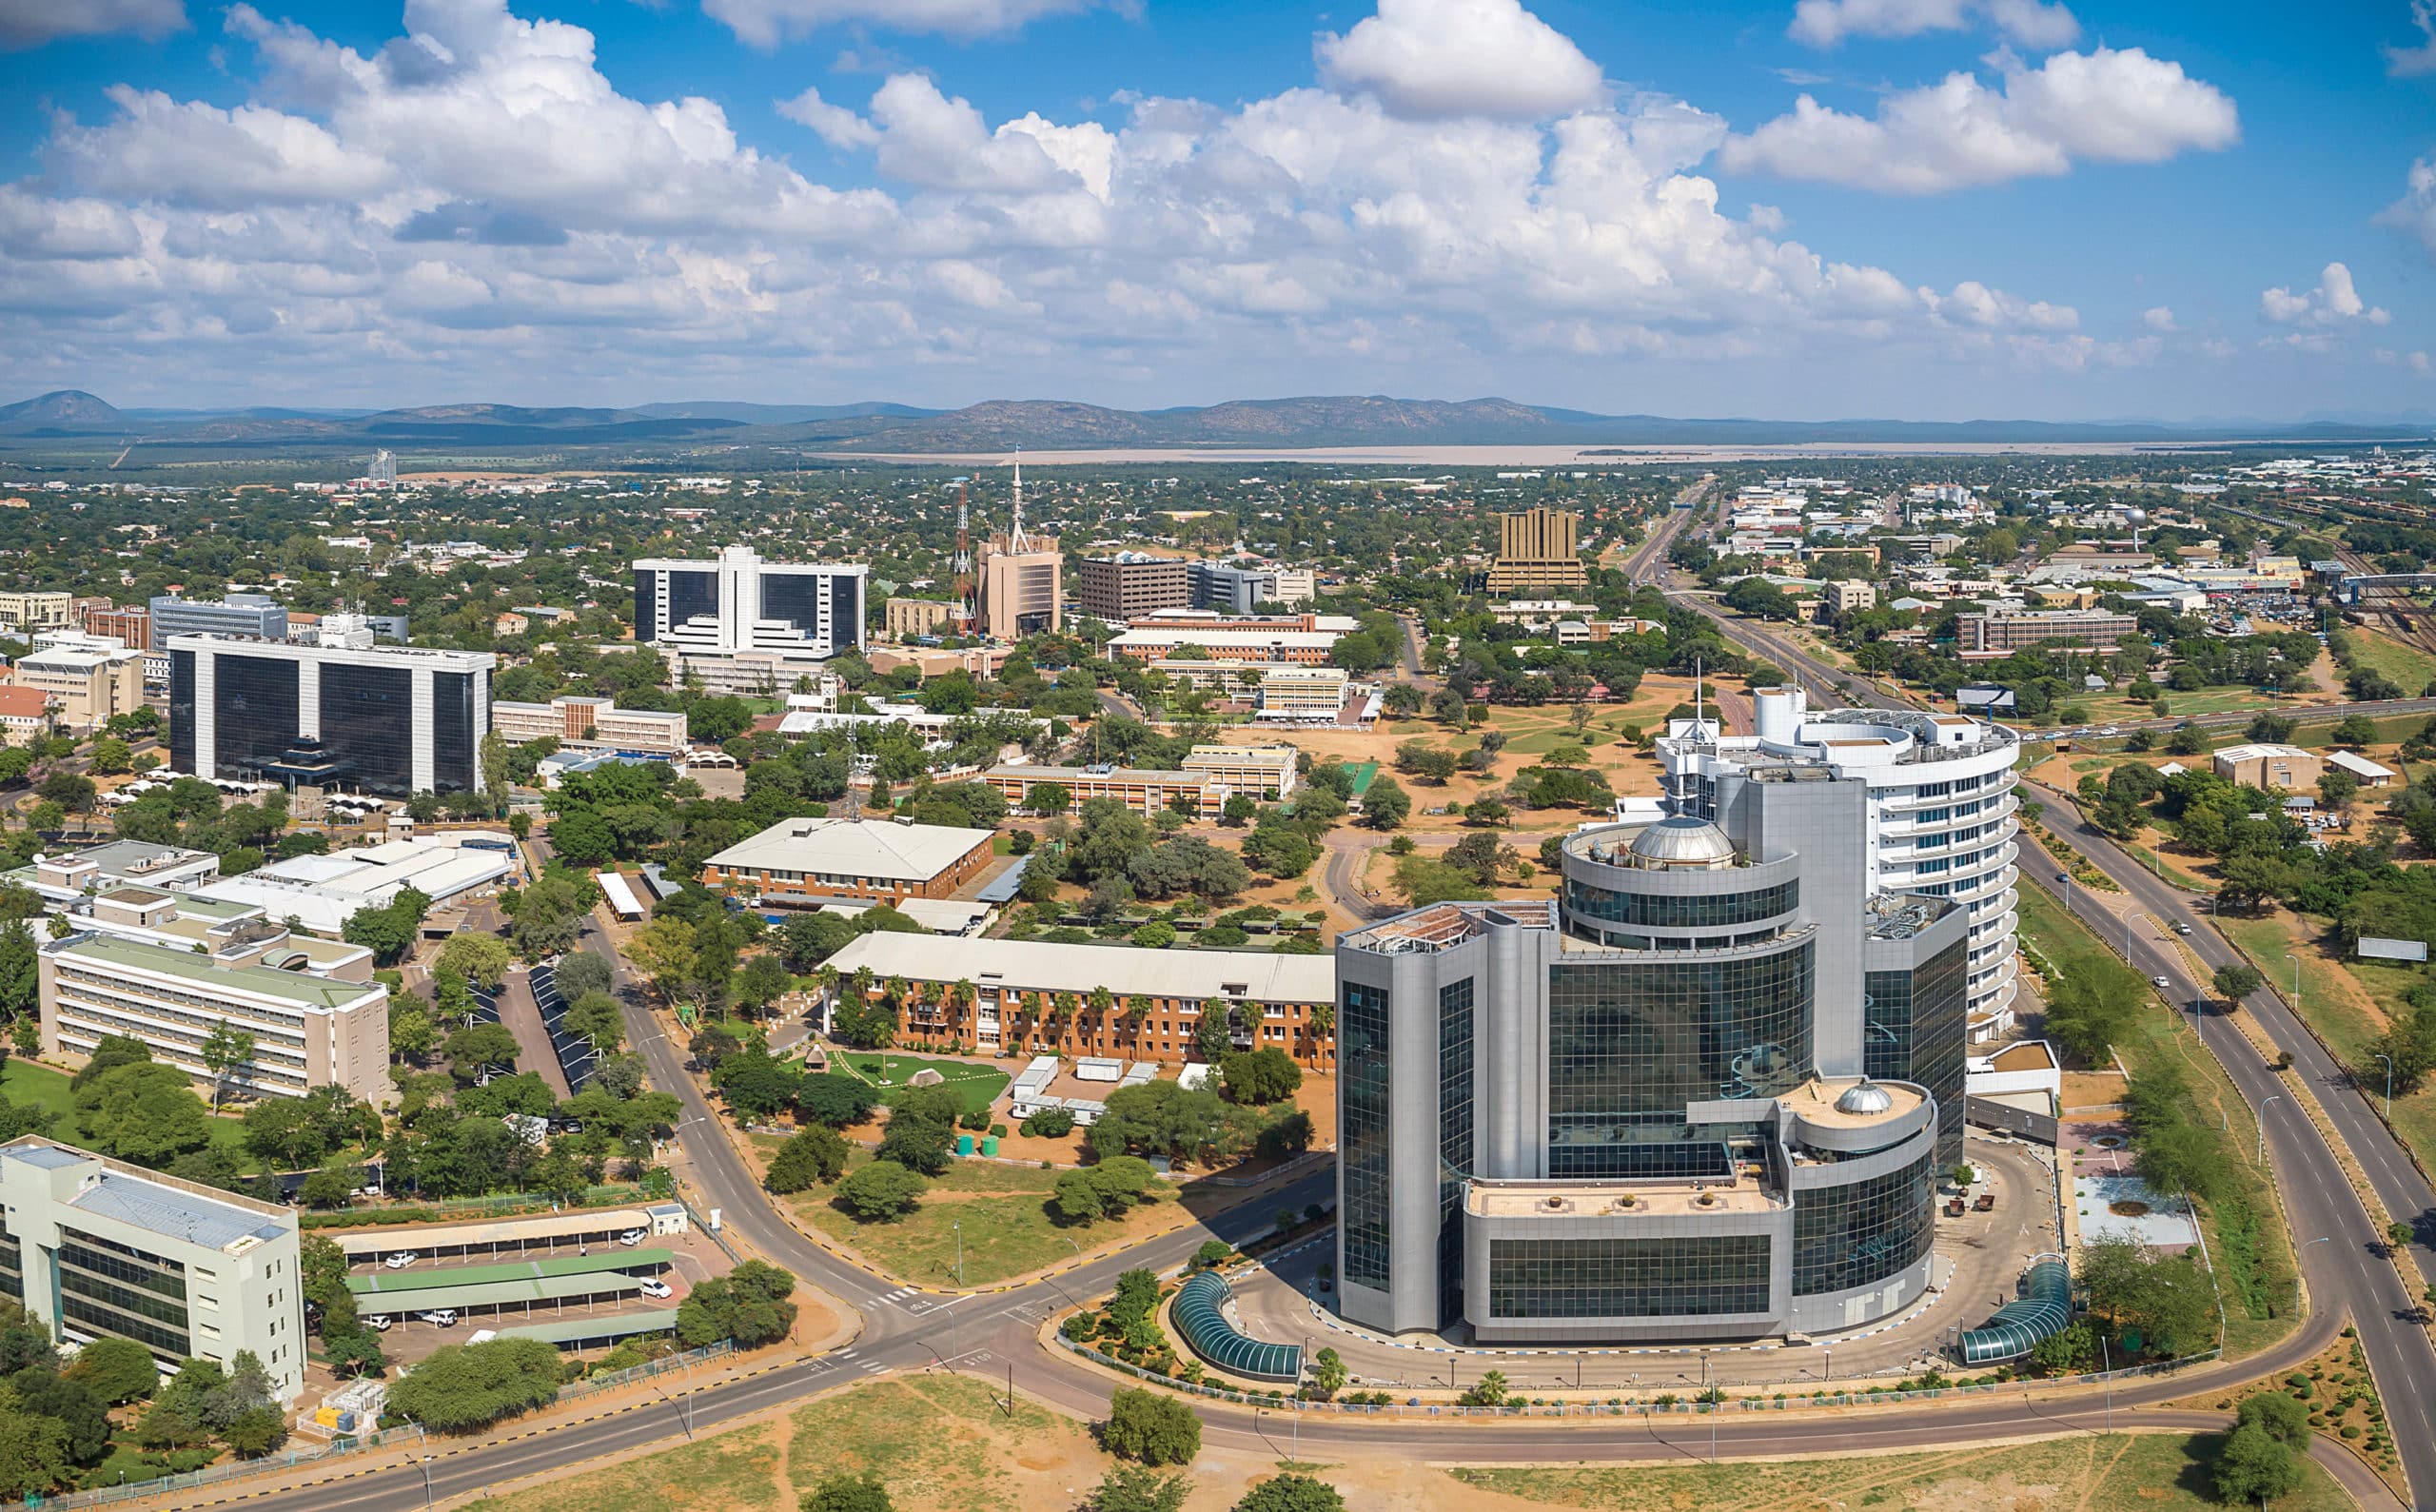 Botswana: A rising star in Southern Africa